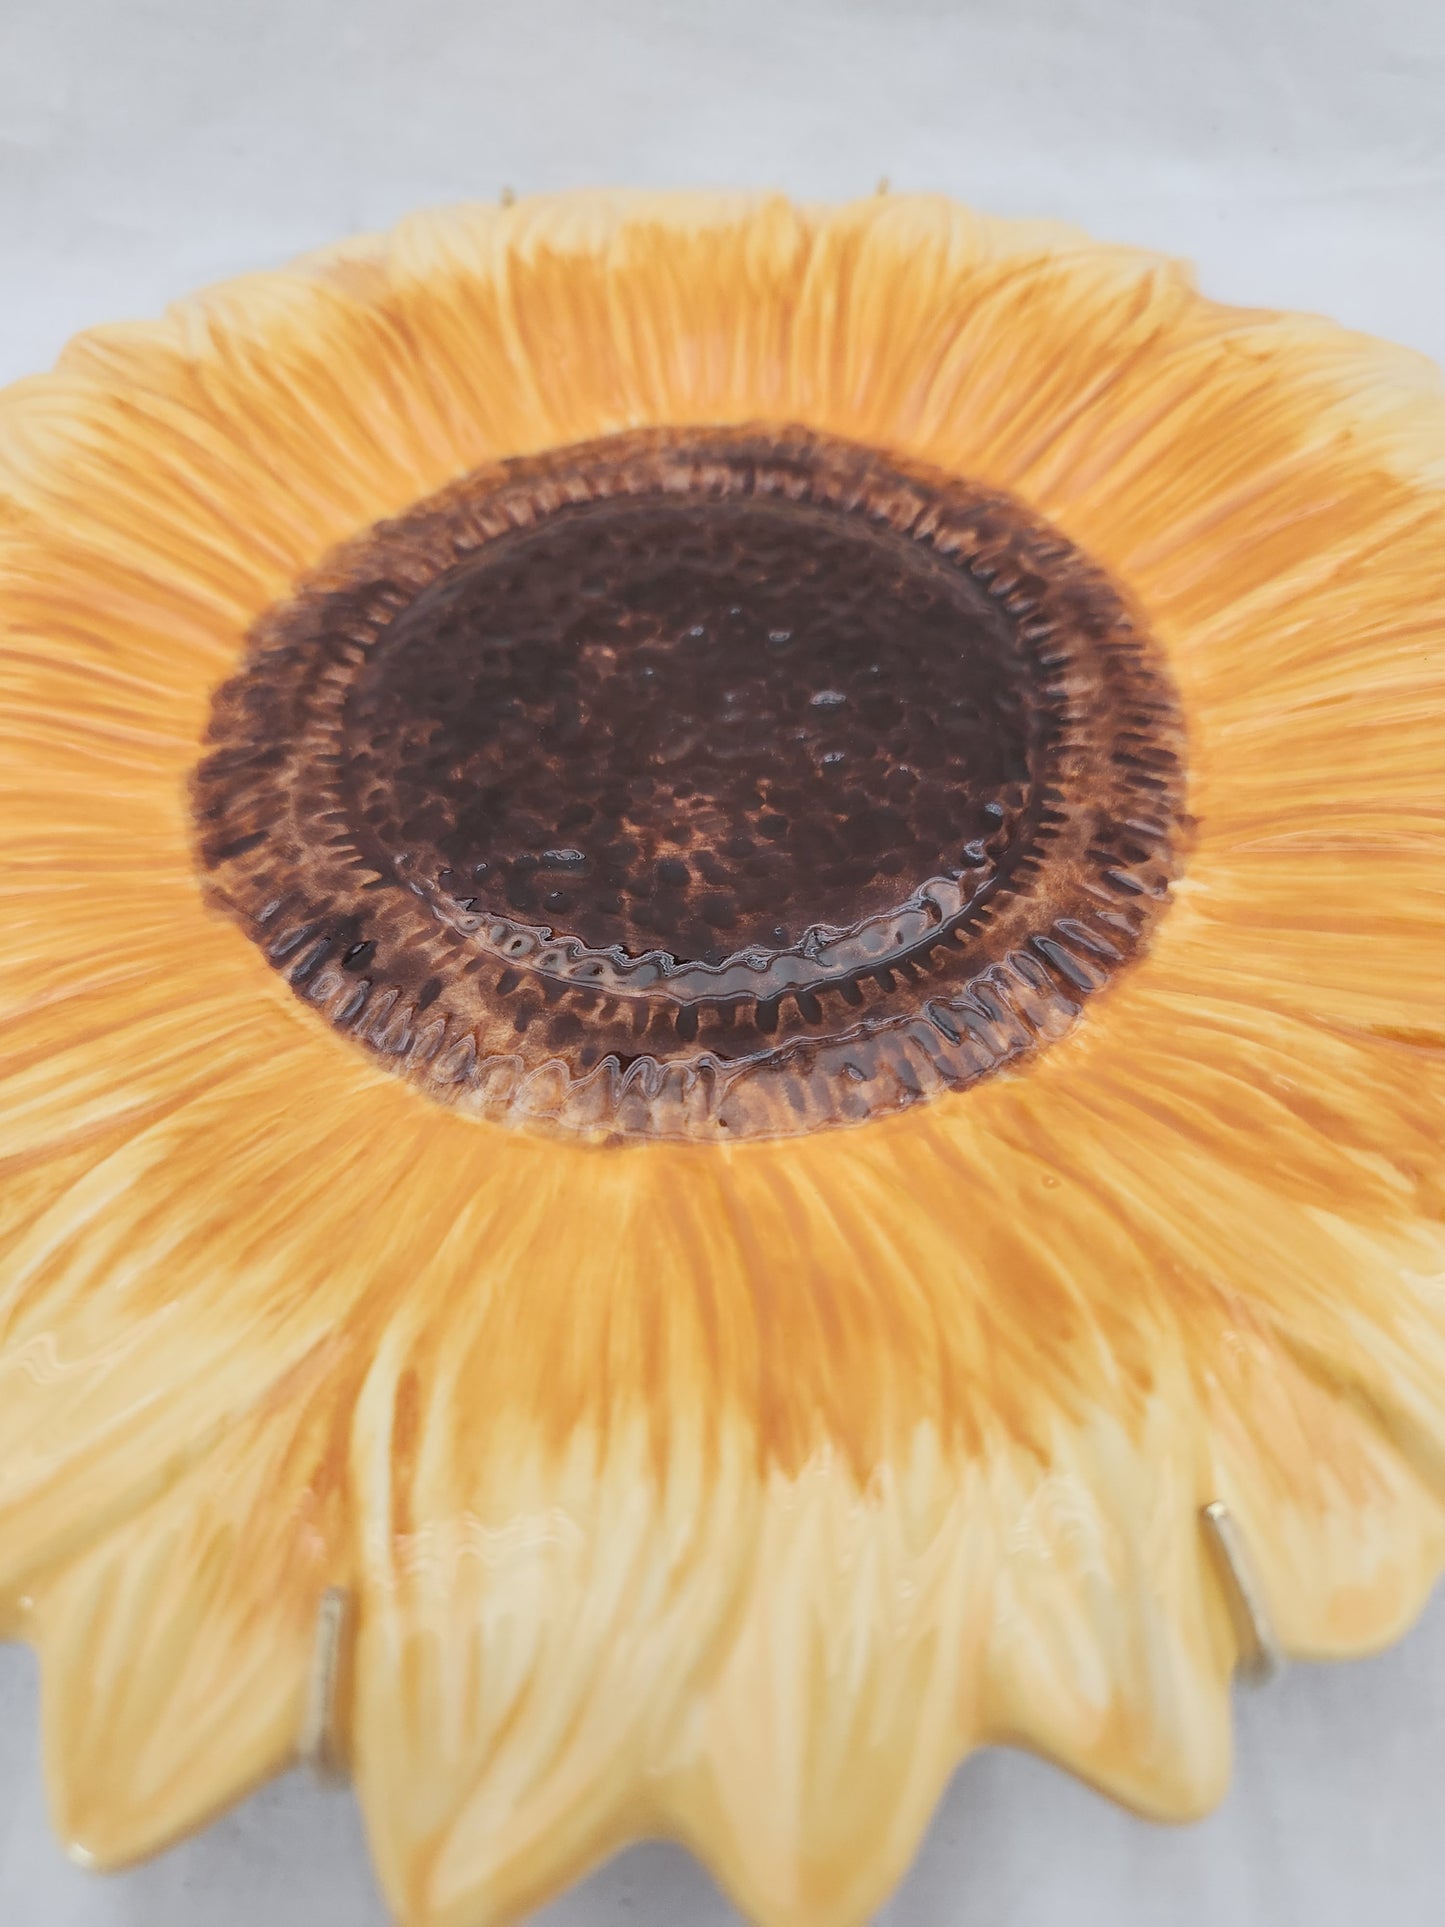 Tuscan Sunflower Decorative Plate by Home Essentials and Beyond - made in PRC